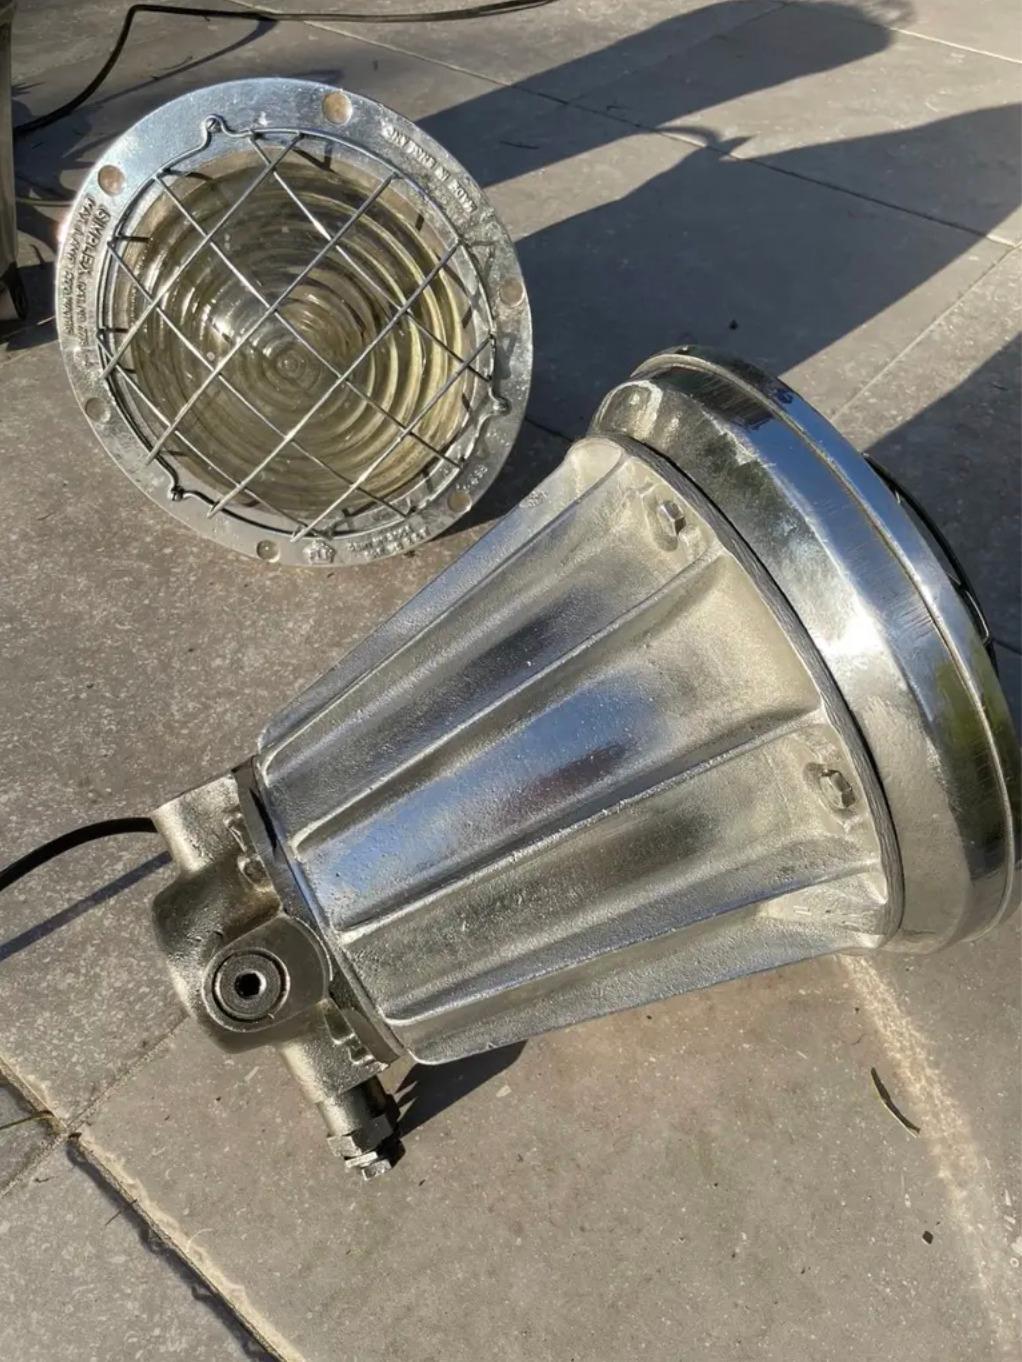 This British army light dates from the 1940s.
Manufactured by the renowned English manufacturer Simplex Electric Company, this lamp is made of cast aluminum with a cast iron base.
Its very thick and translucent glass has a concentric gadroon